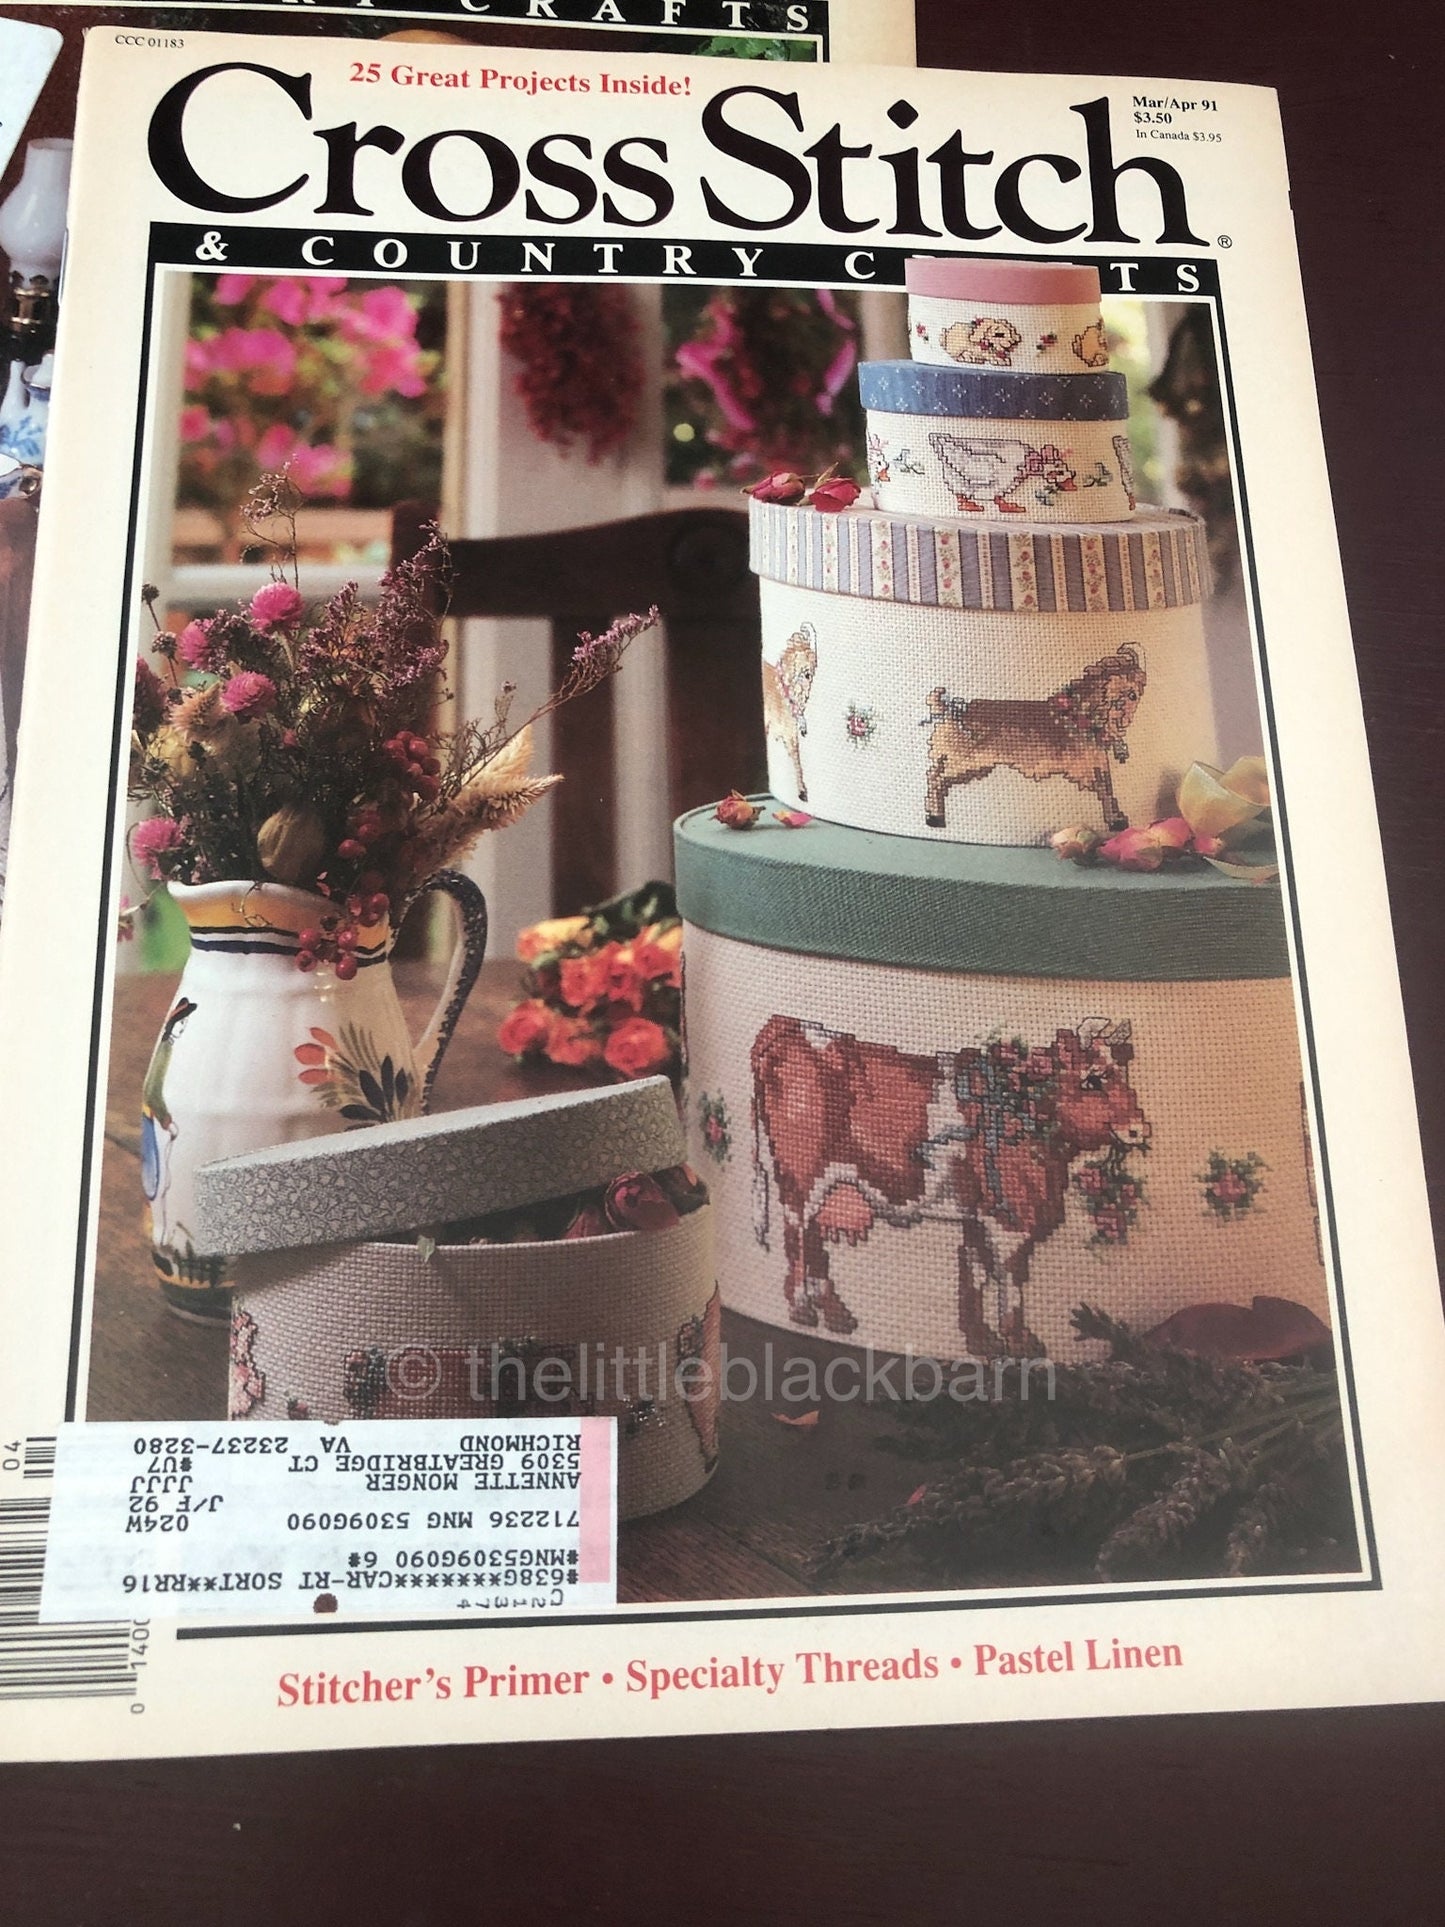 Cross Stitch & Country Crafts, Vintage 1991 Cross Stitch Pattern Magazines 6 issues*